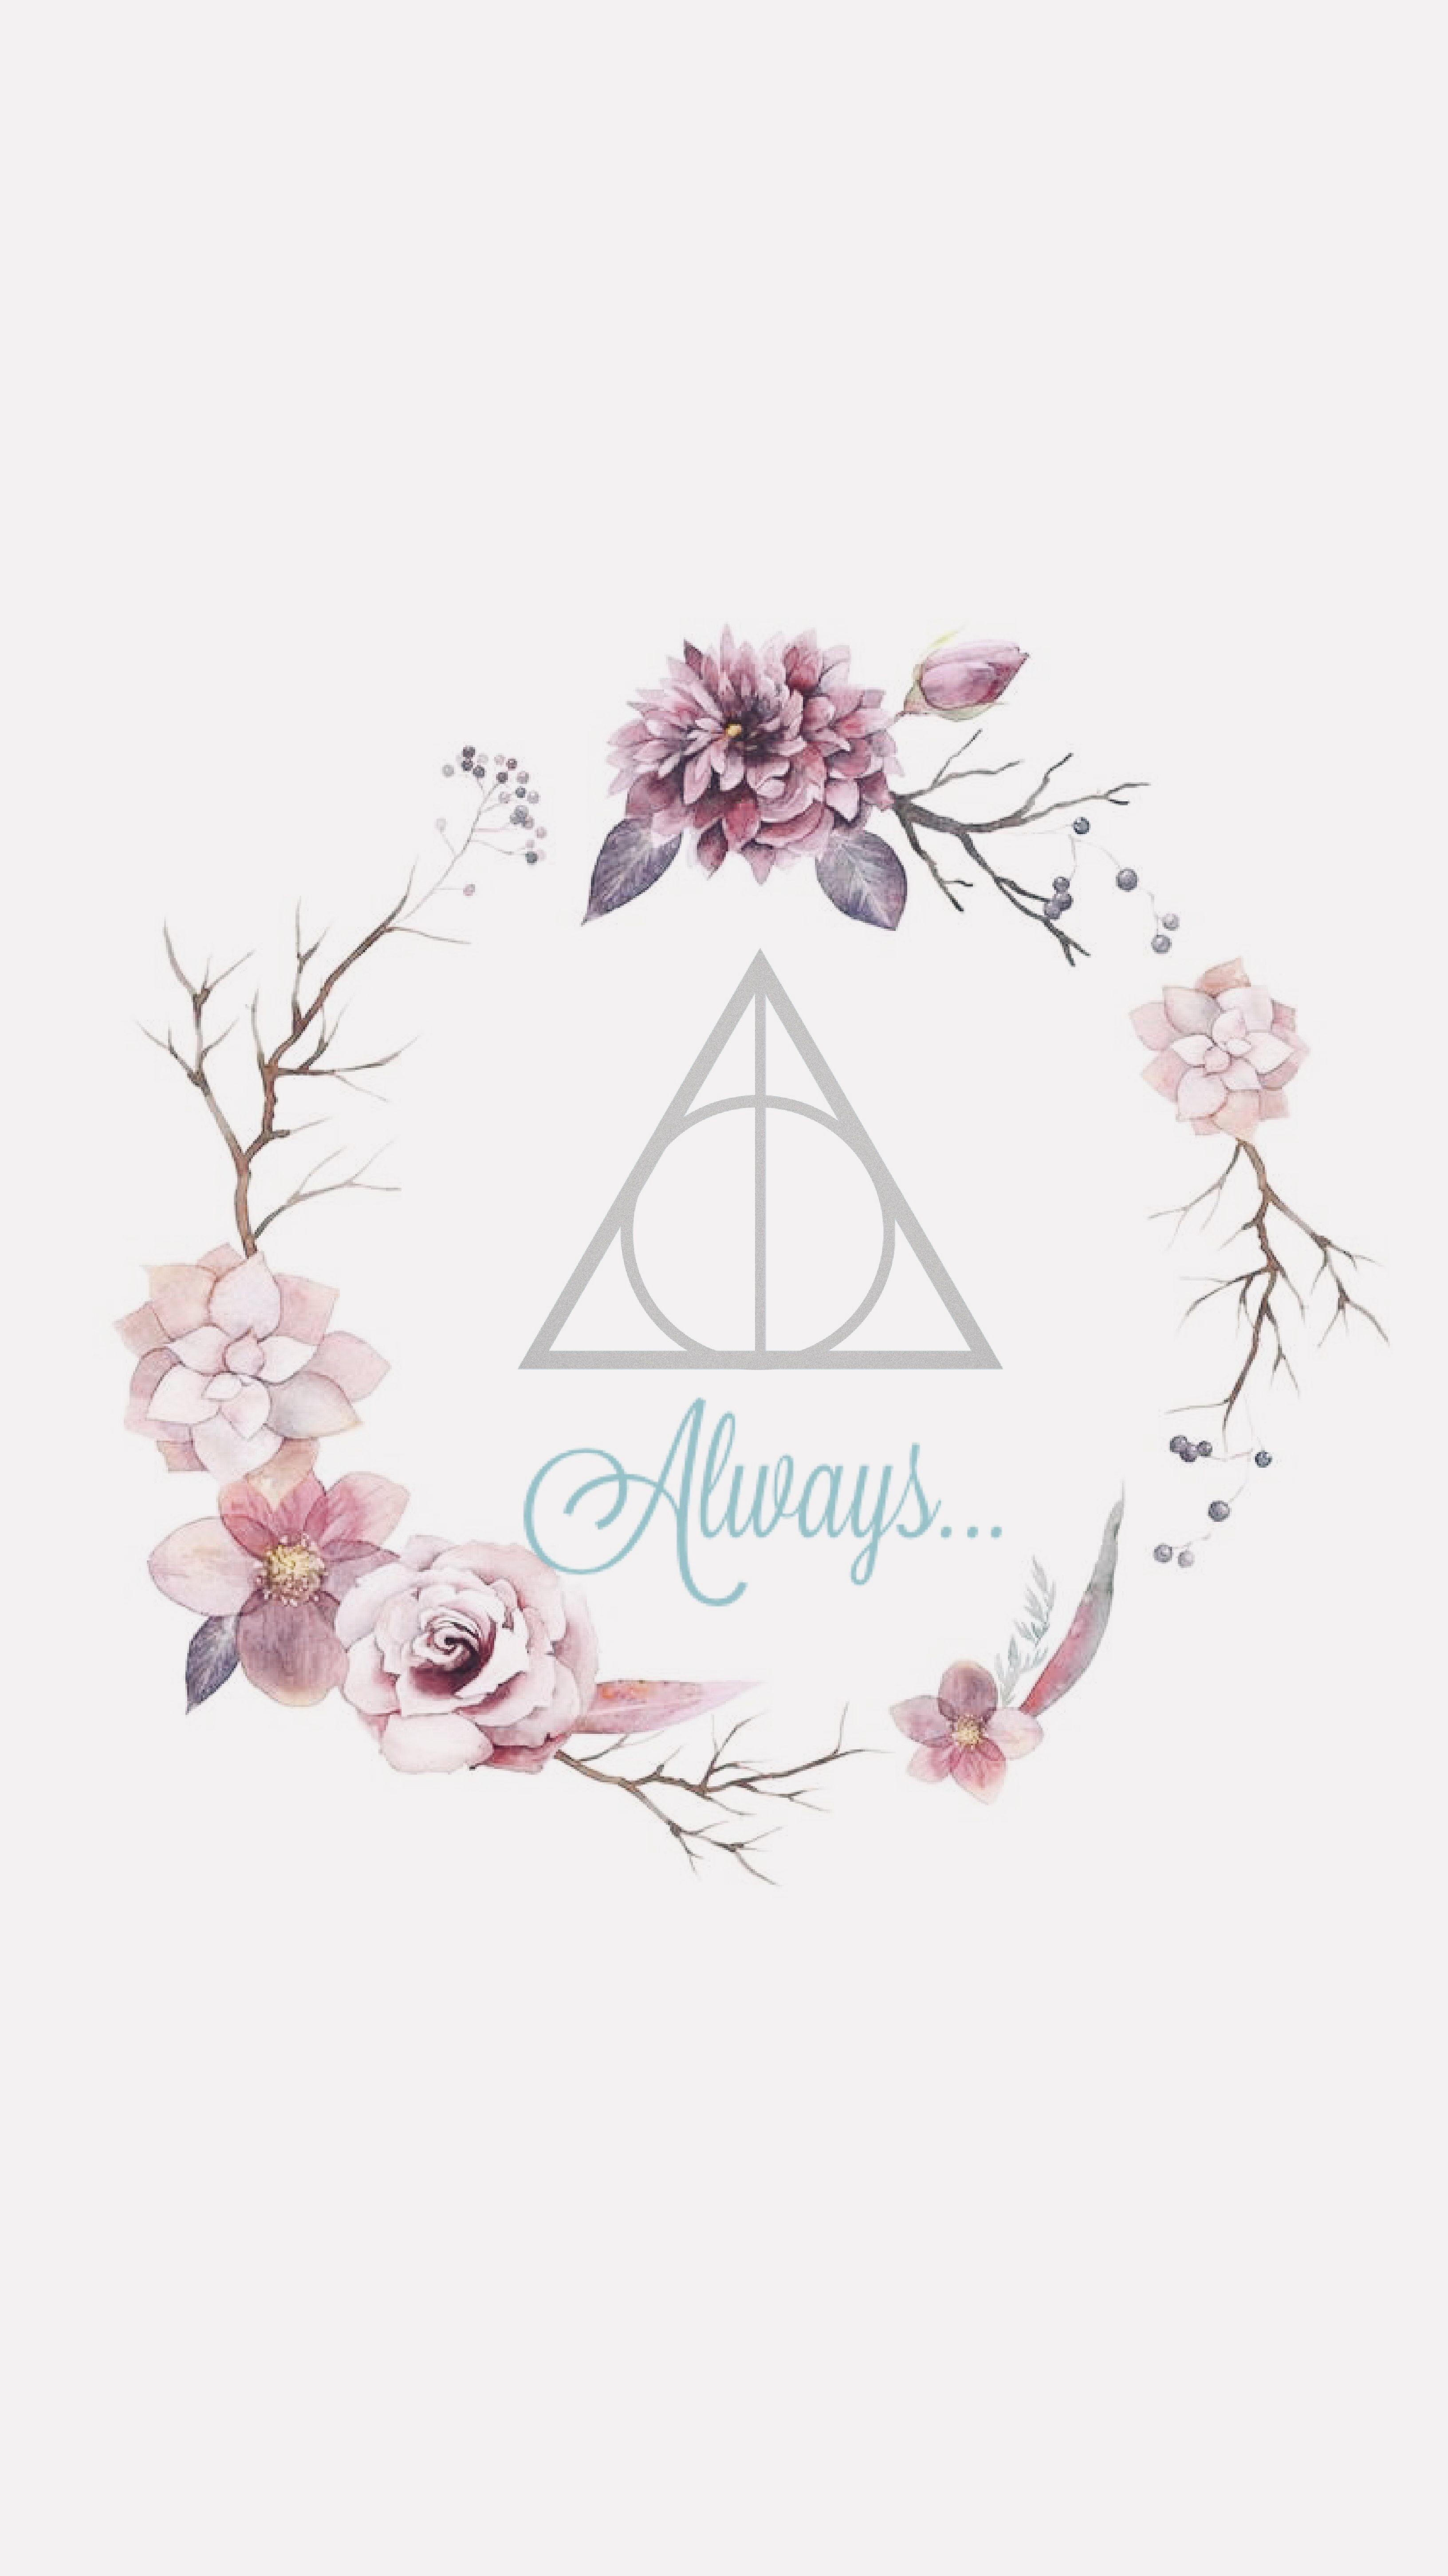 Harry Potter  Tap to see more amazing Harry Potter wallpaper mobile9